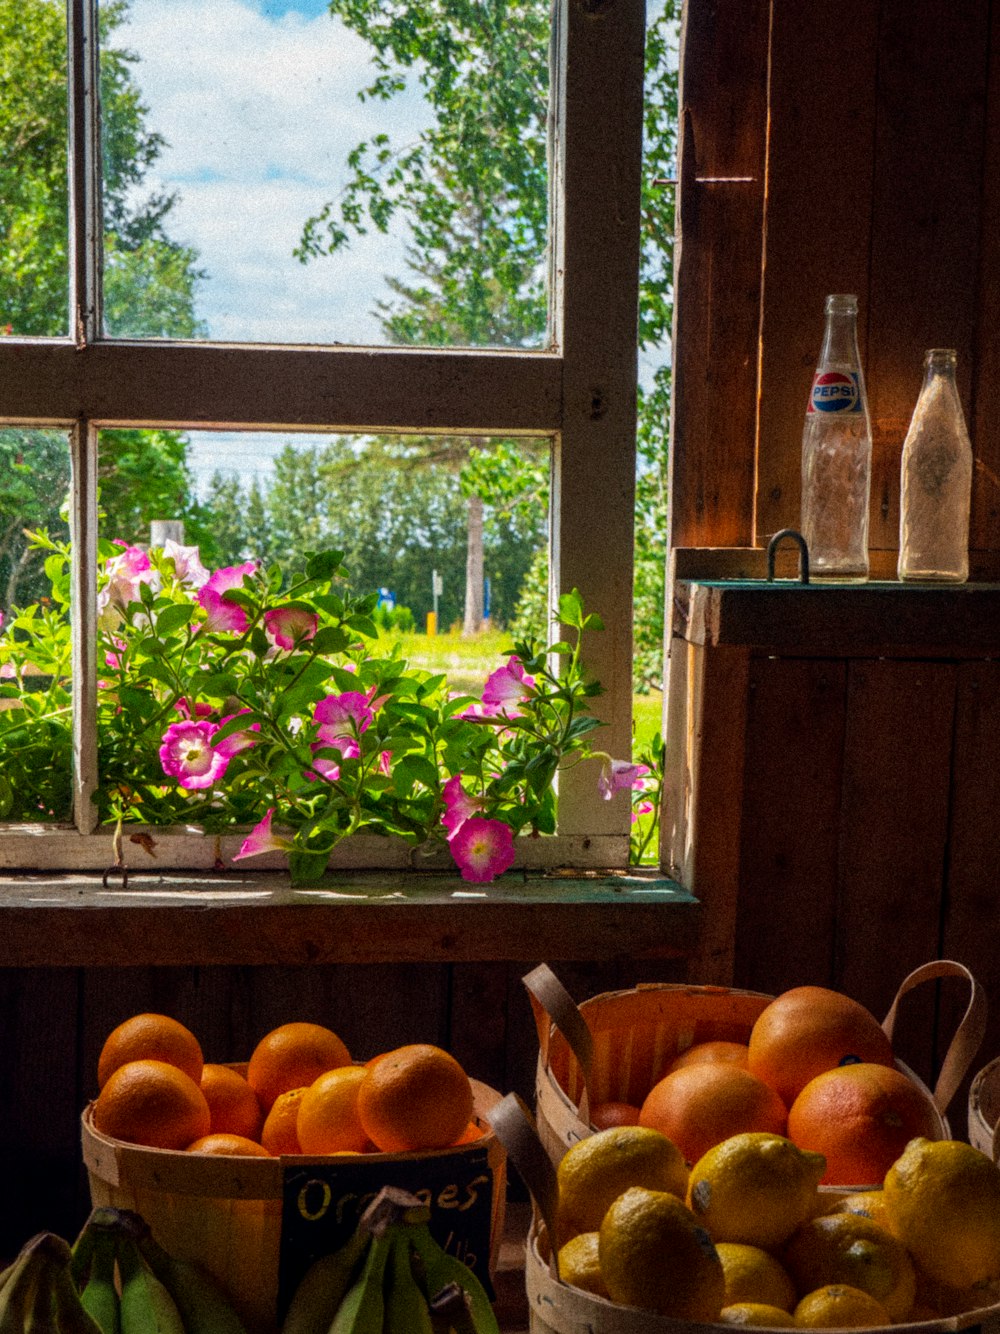 a couple of baskets full of oranges in front of a window